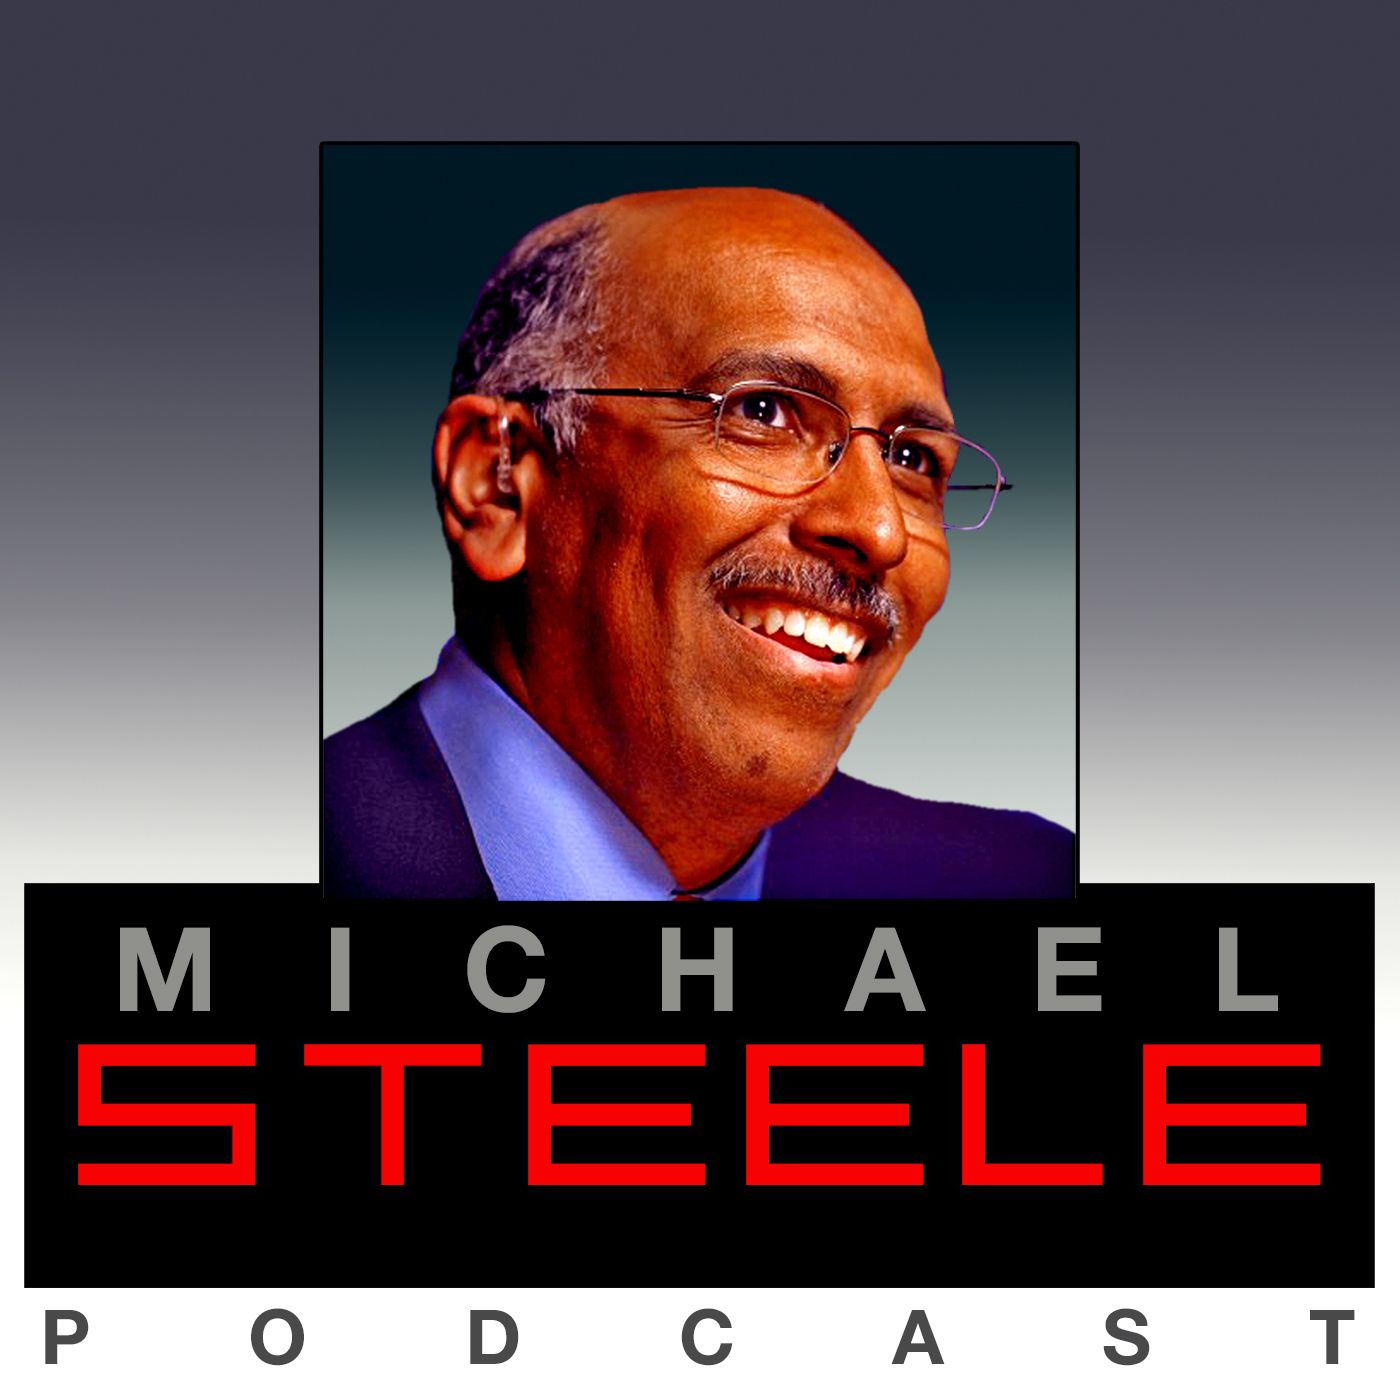 The Michael Steele Podcast